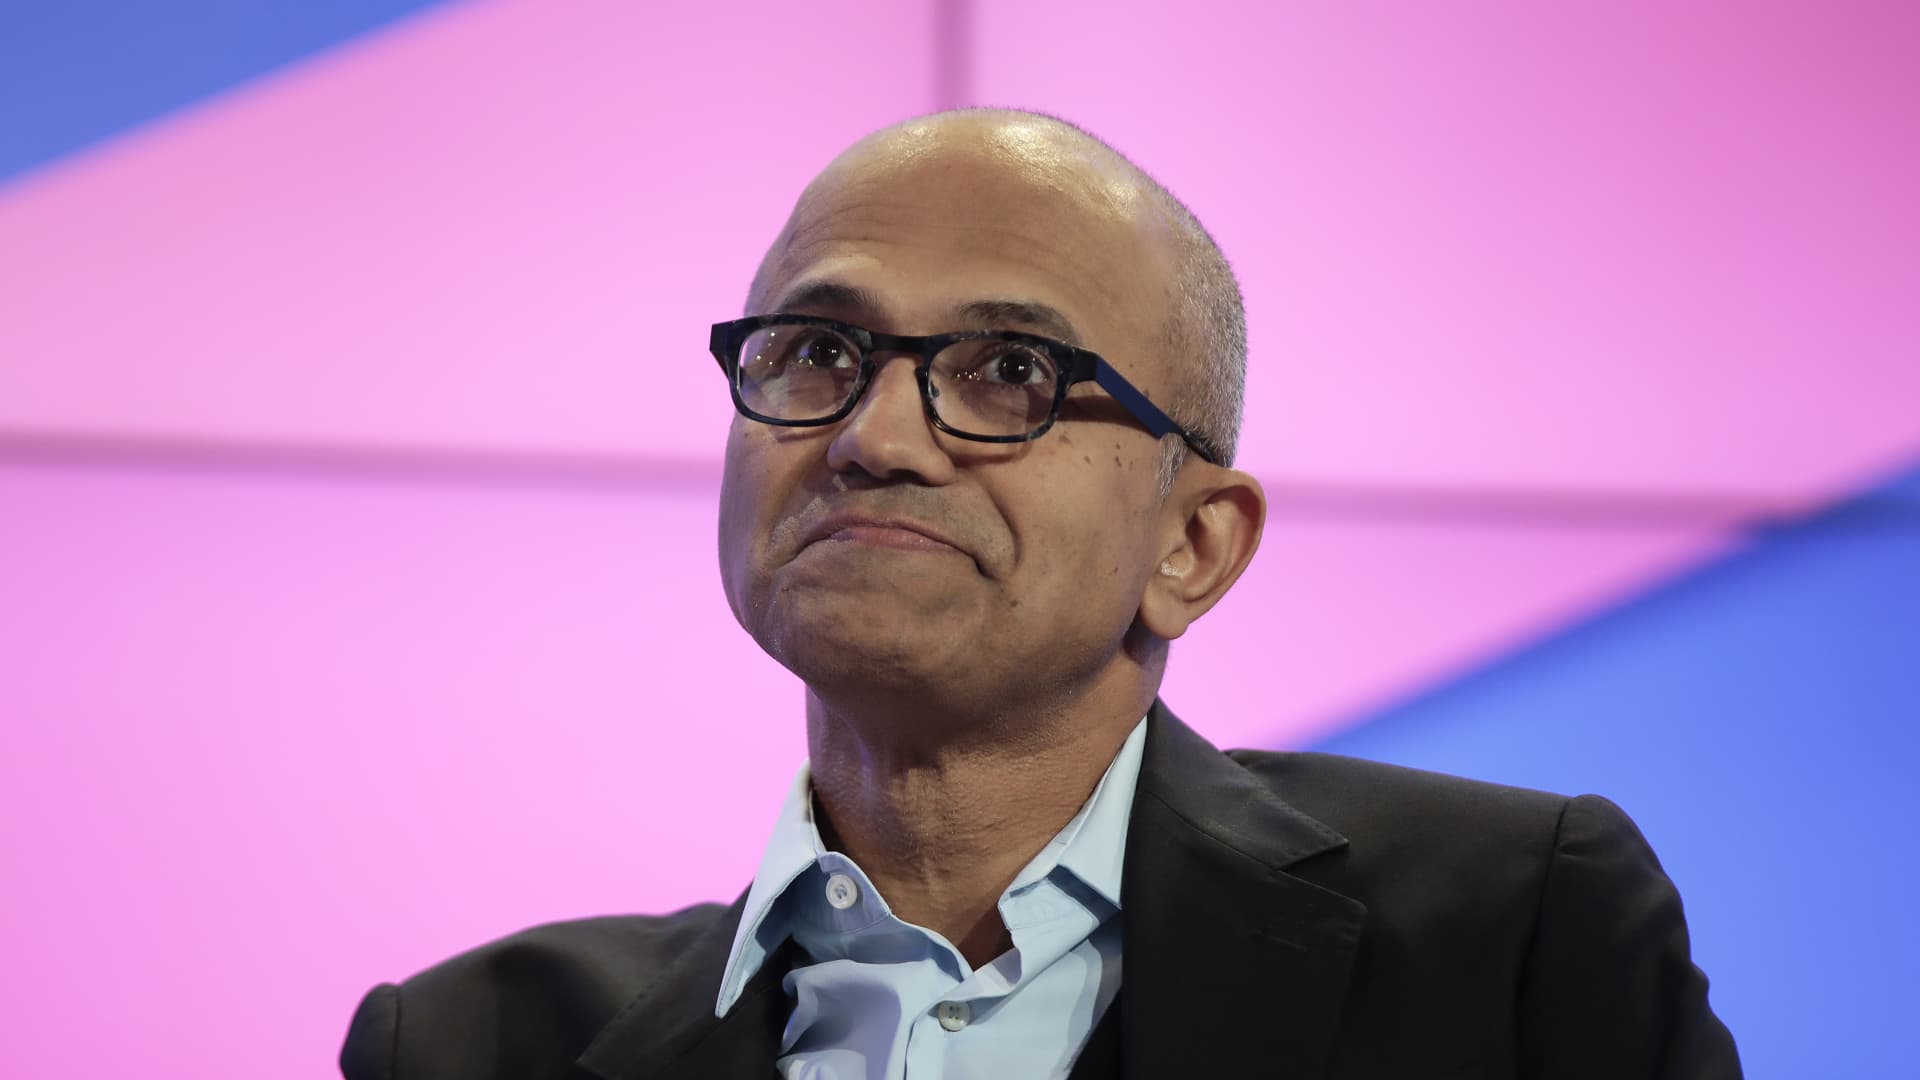 Microsoft CEO talks A.I. concerns and its impact on jobs, education